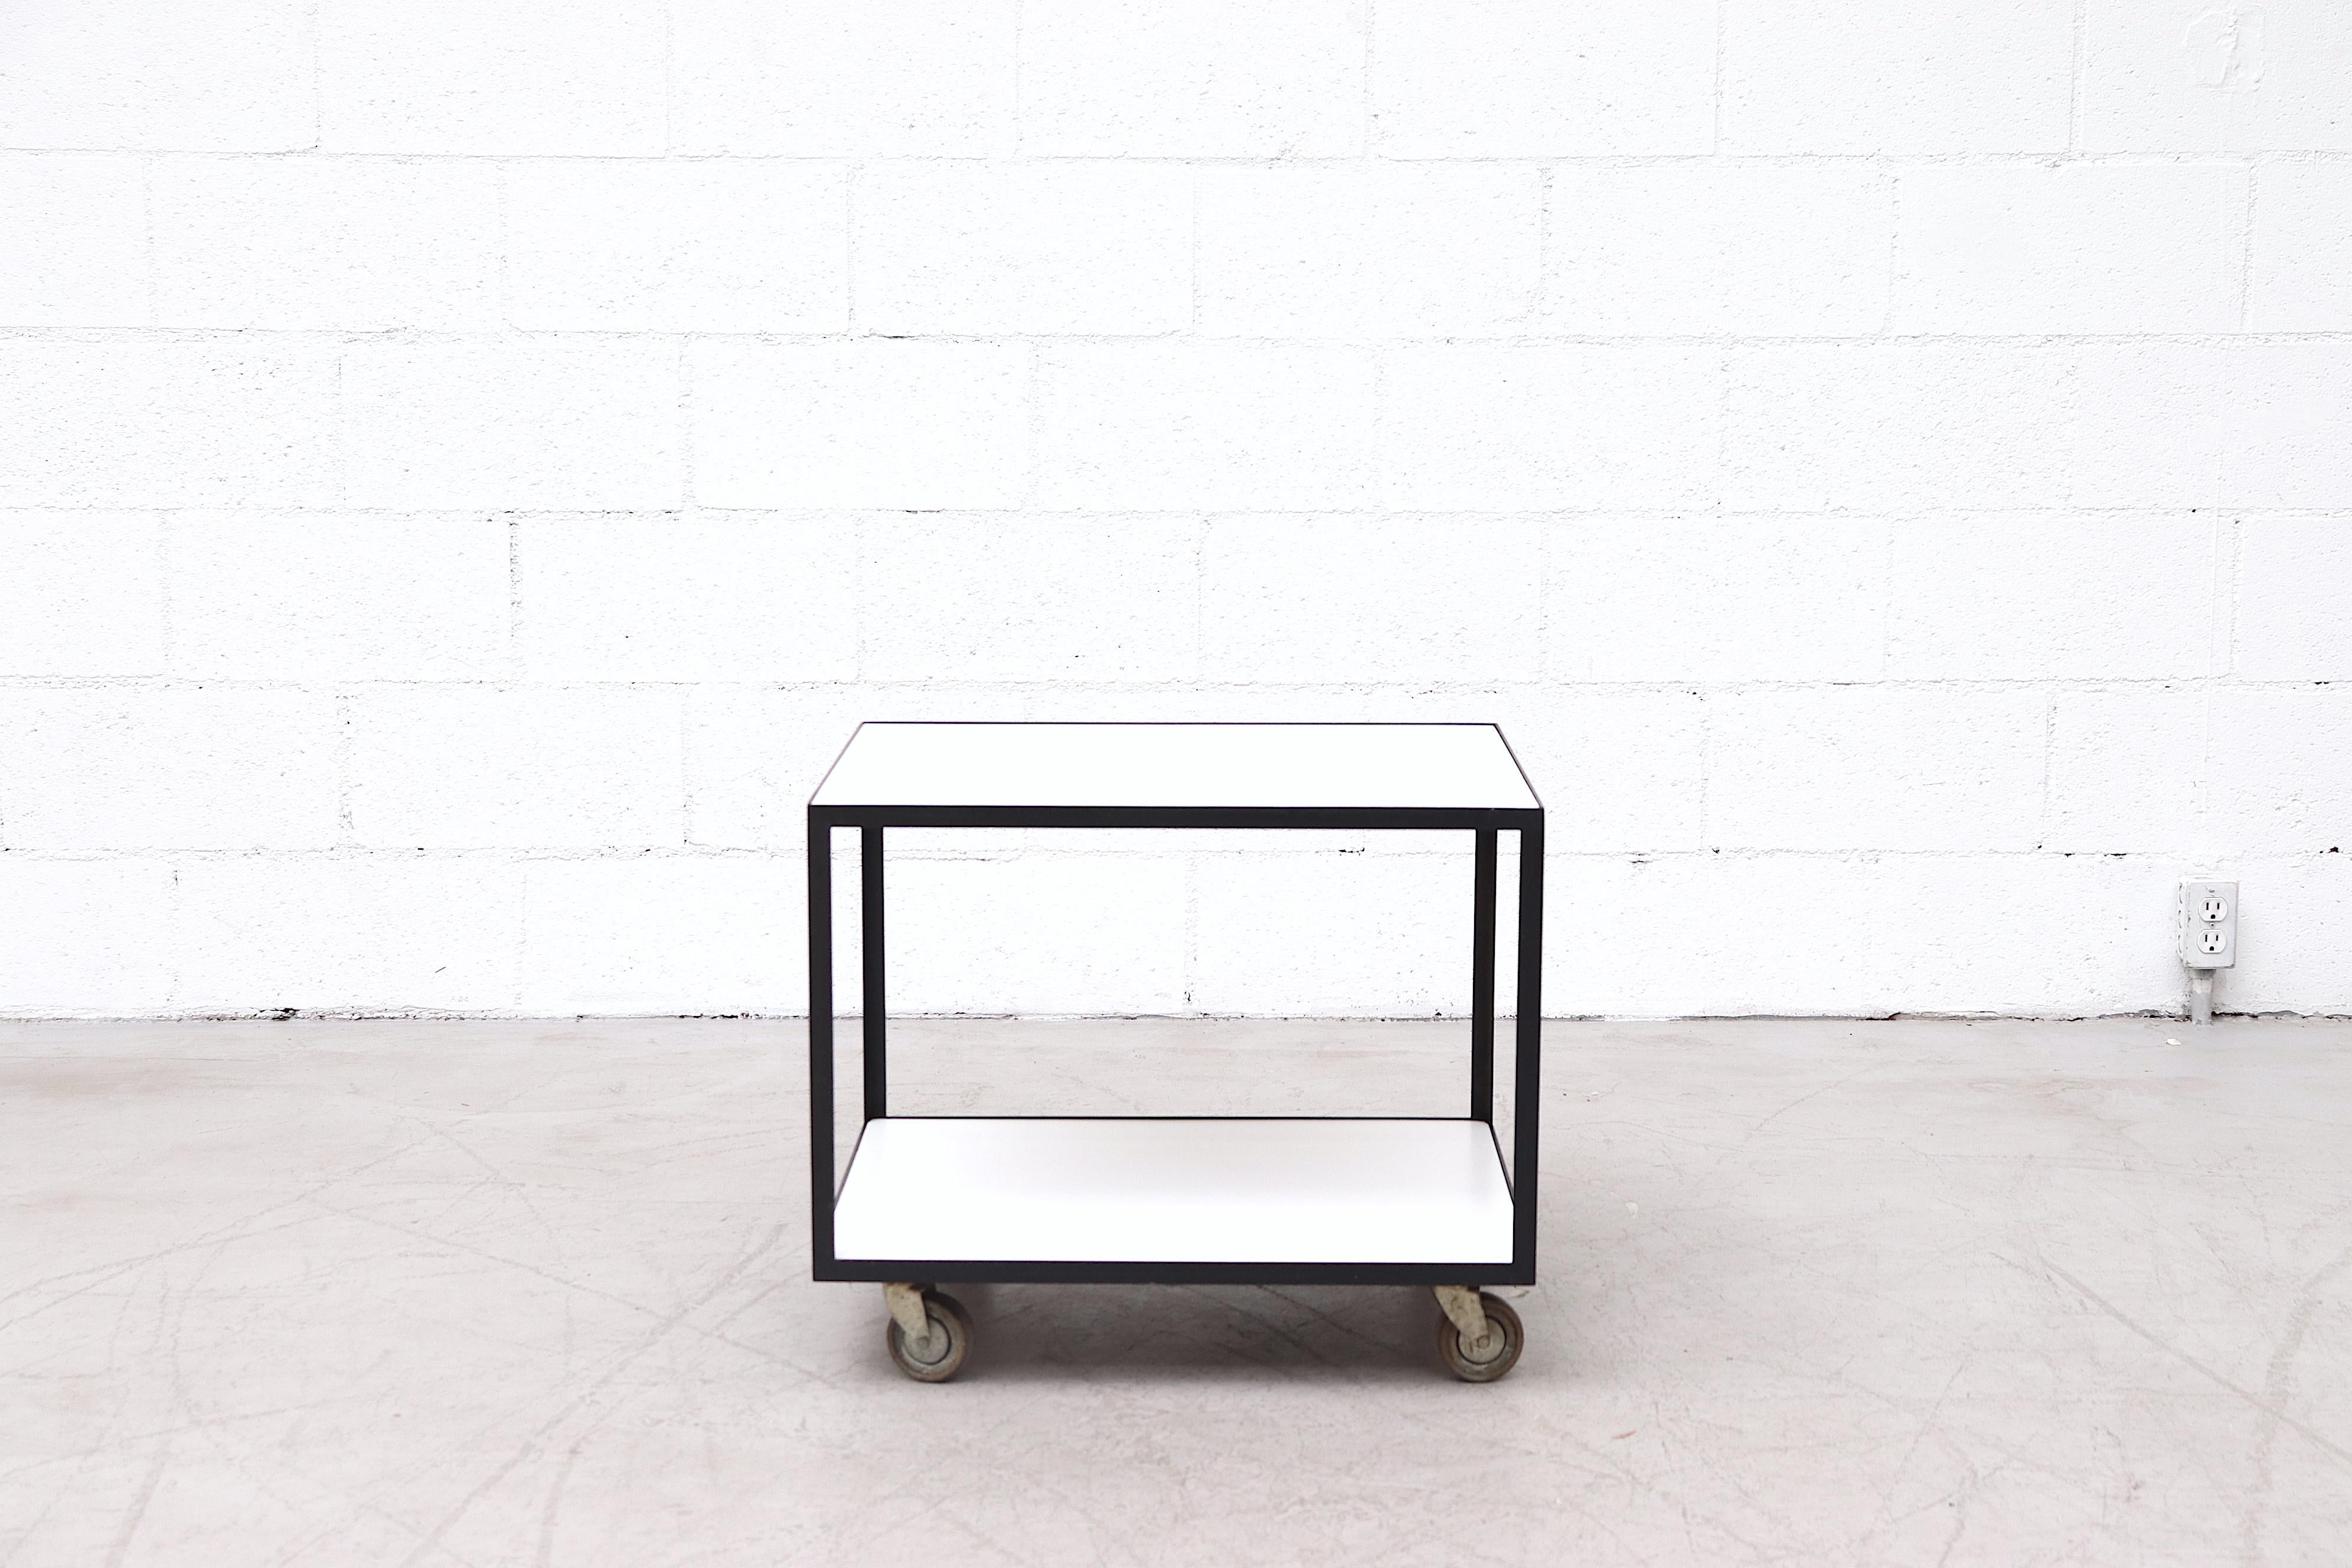 Janni Van Pelt style rolling bar cart with black enameled metal frame and inset white formica surfaces. In original condition with visible wear and some enamel loss.